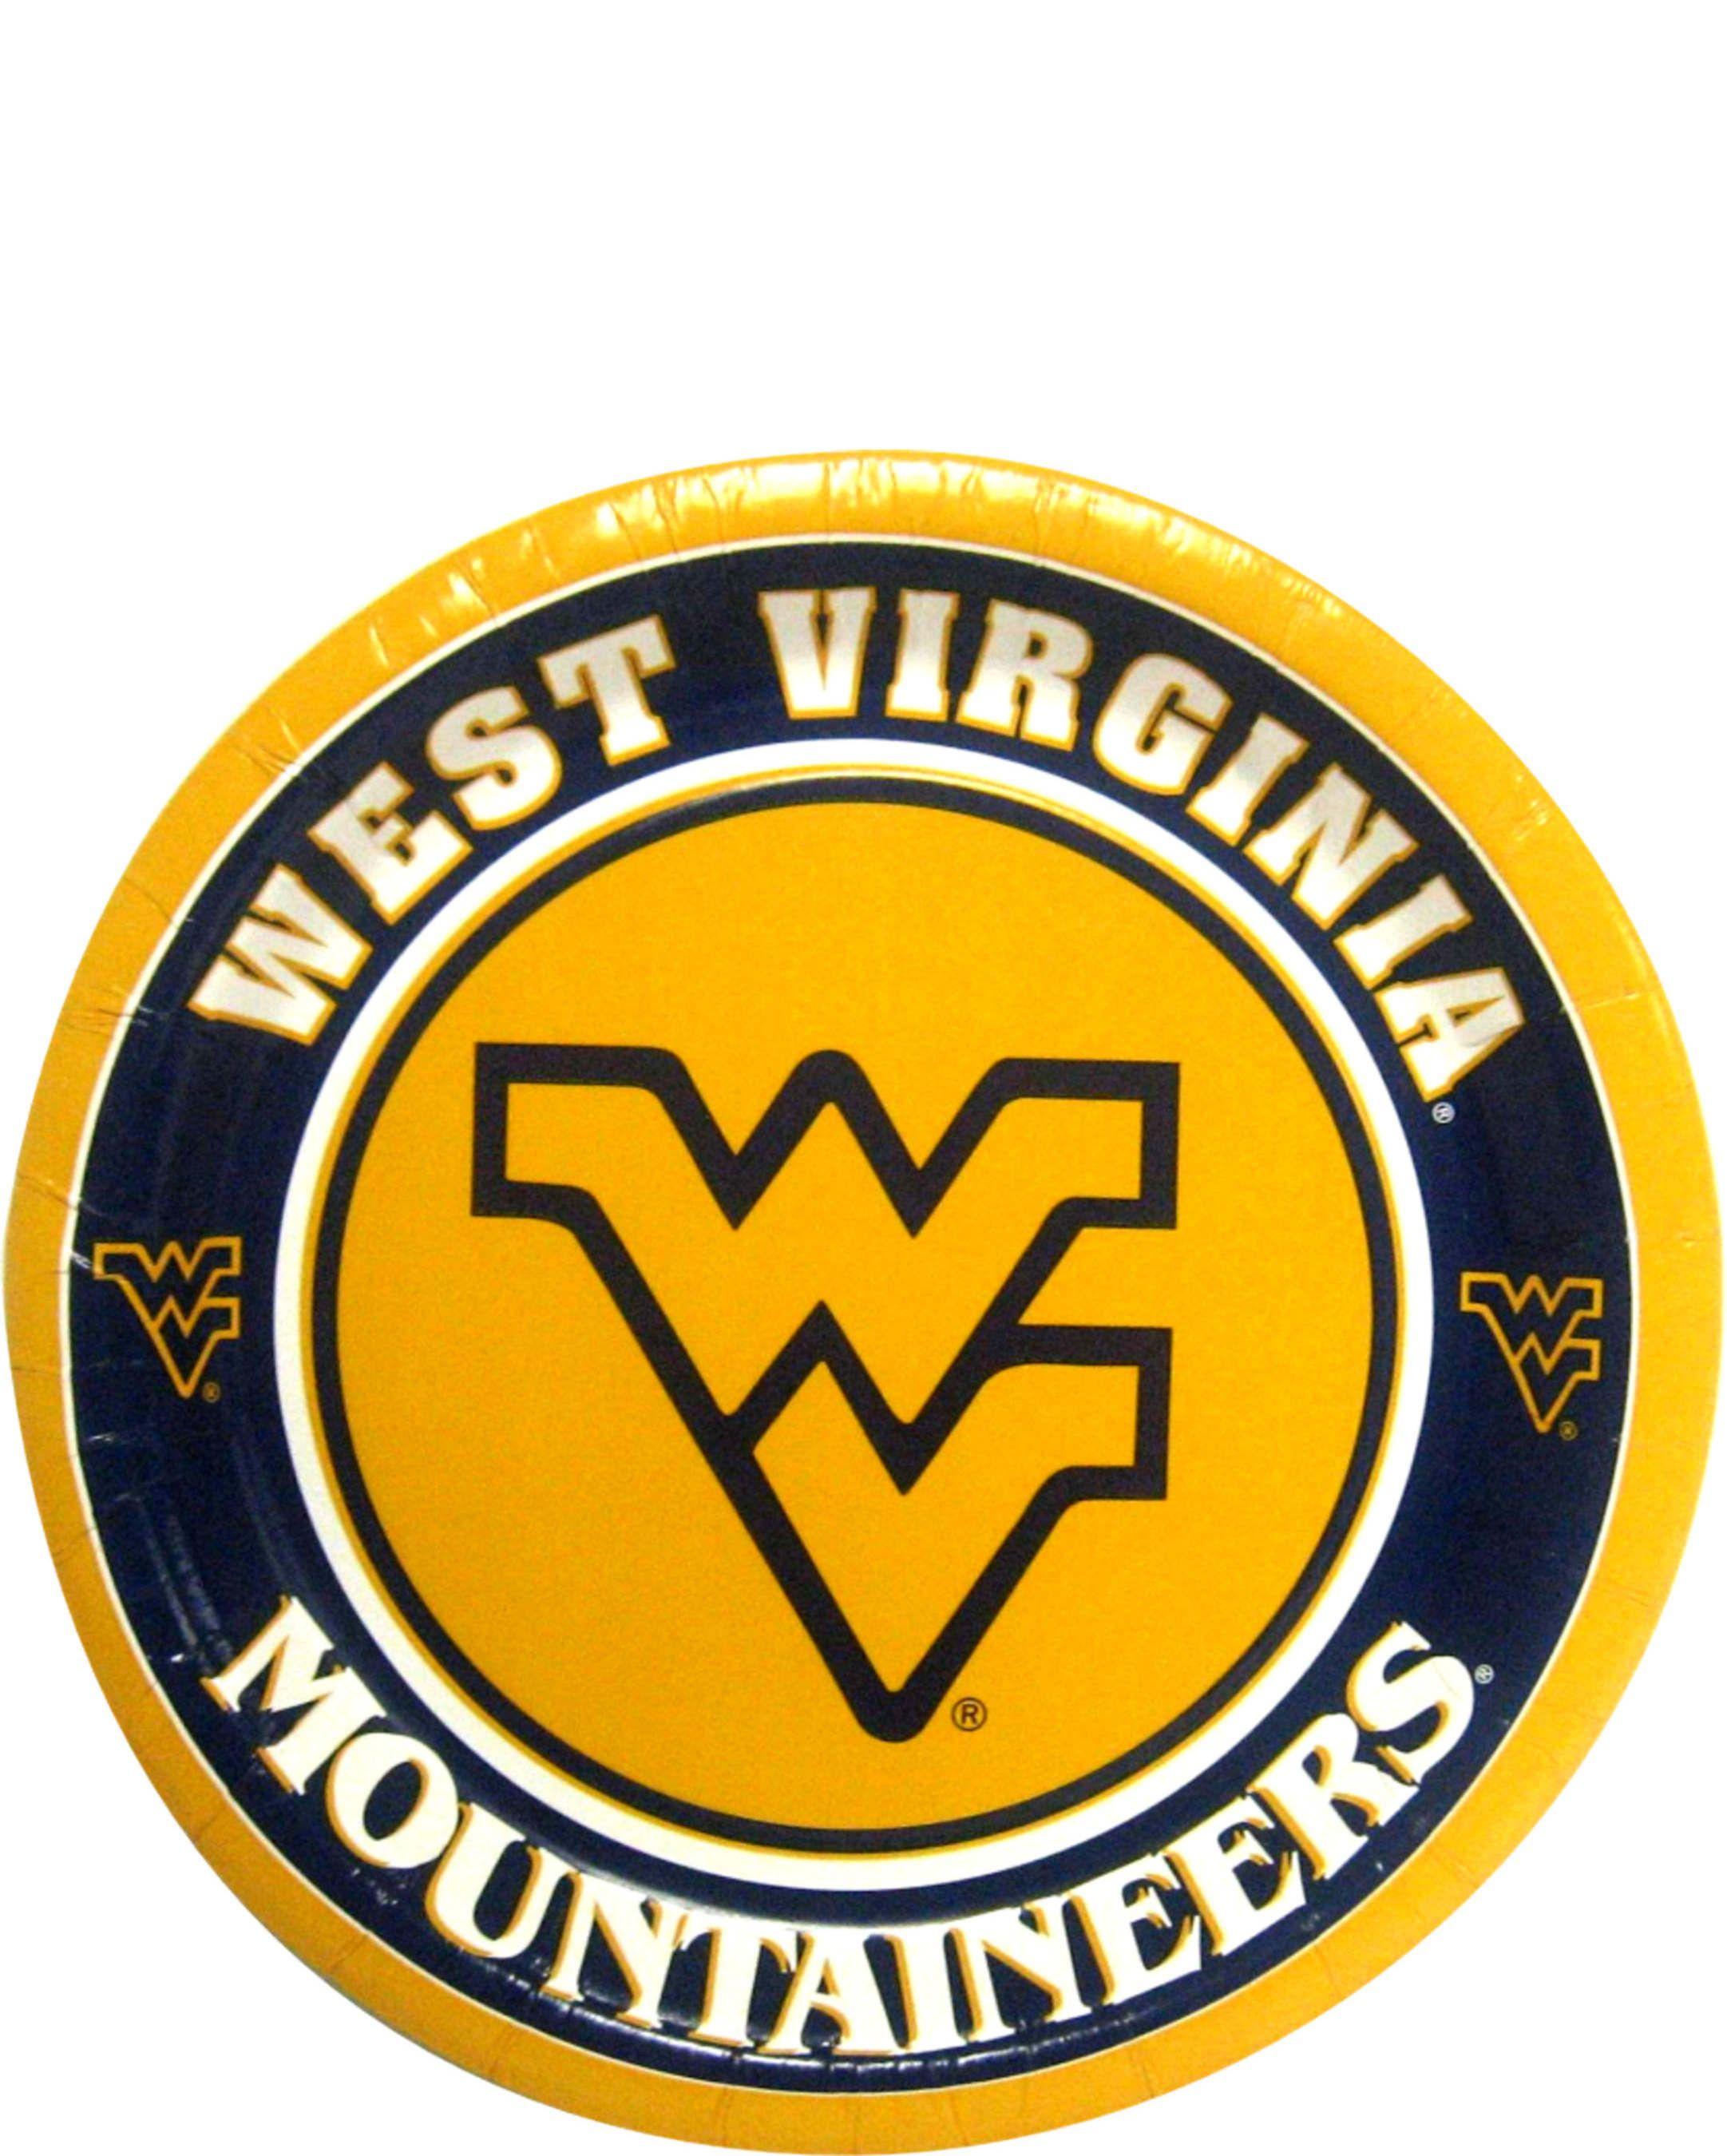 WV Football Logo - West Virginia Mountaineers 7 Paper Plates, pack of 48